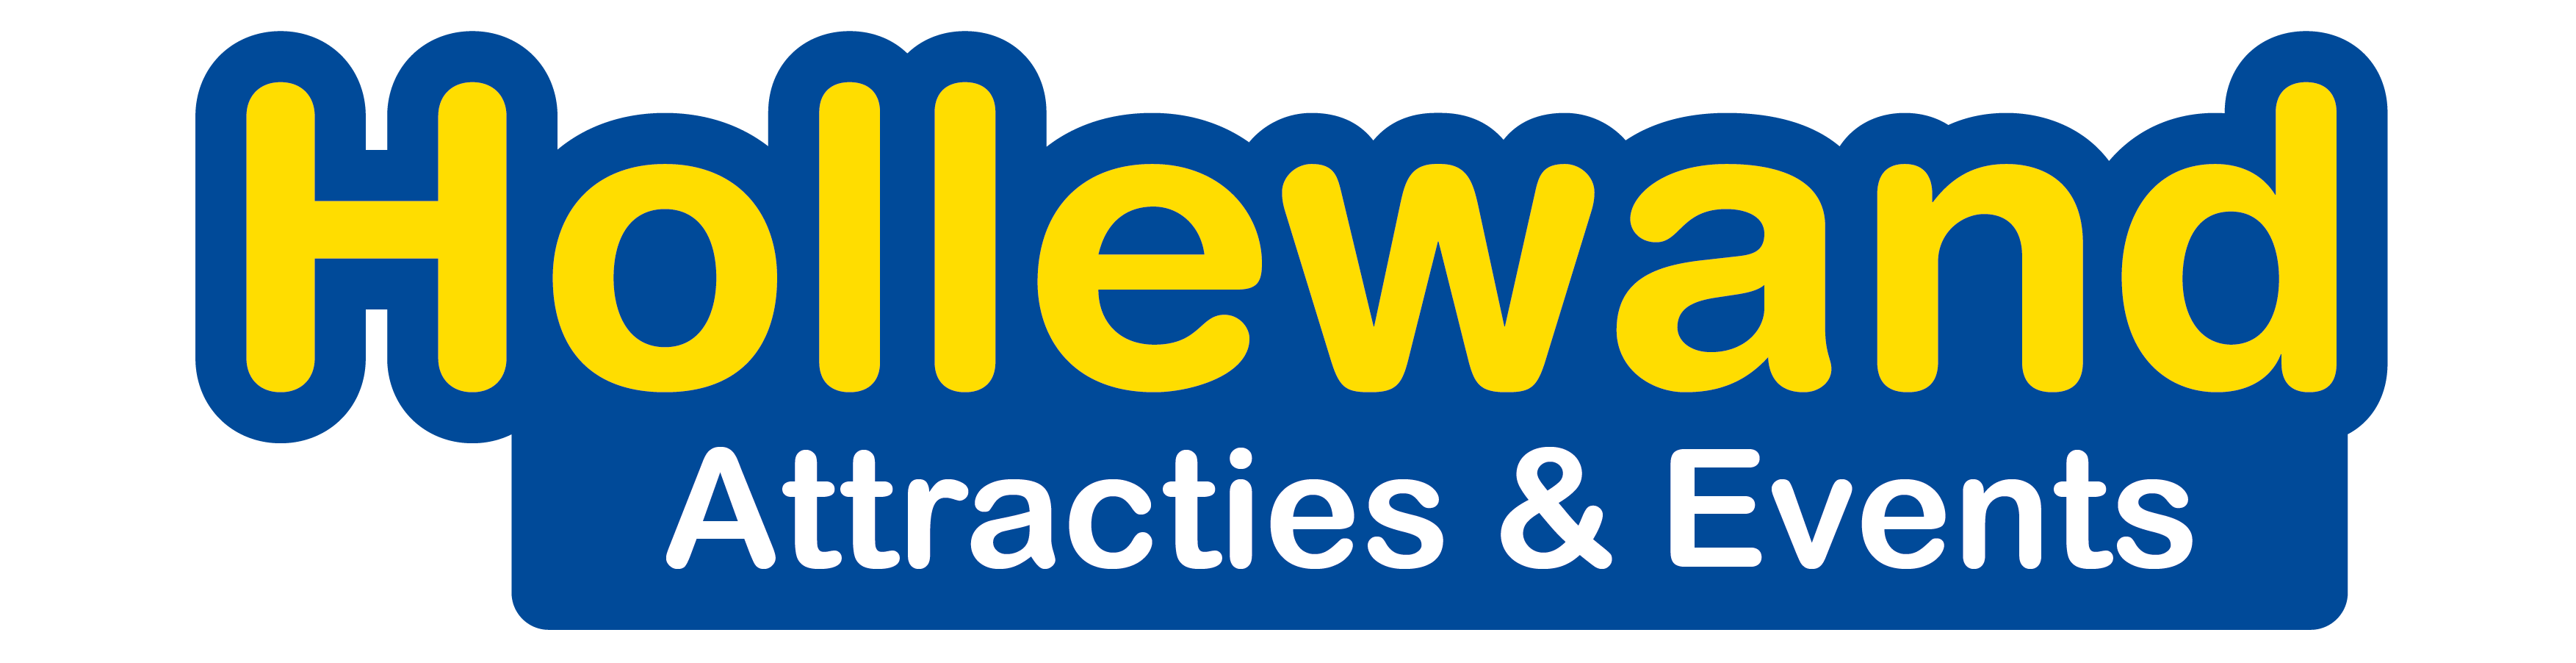 Hollewand attracties & events Logo